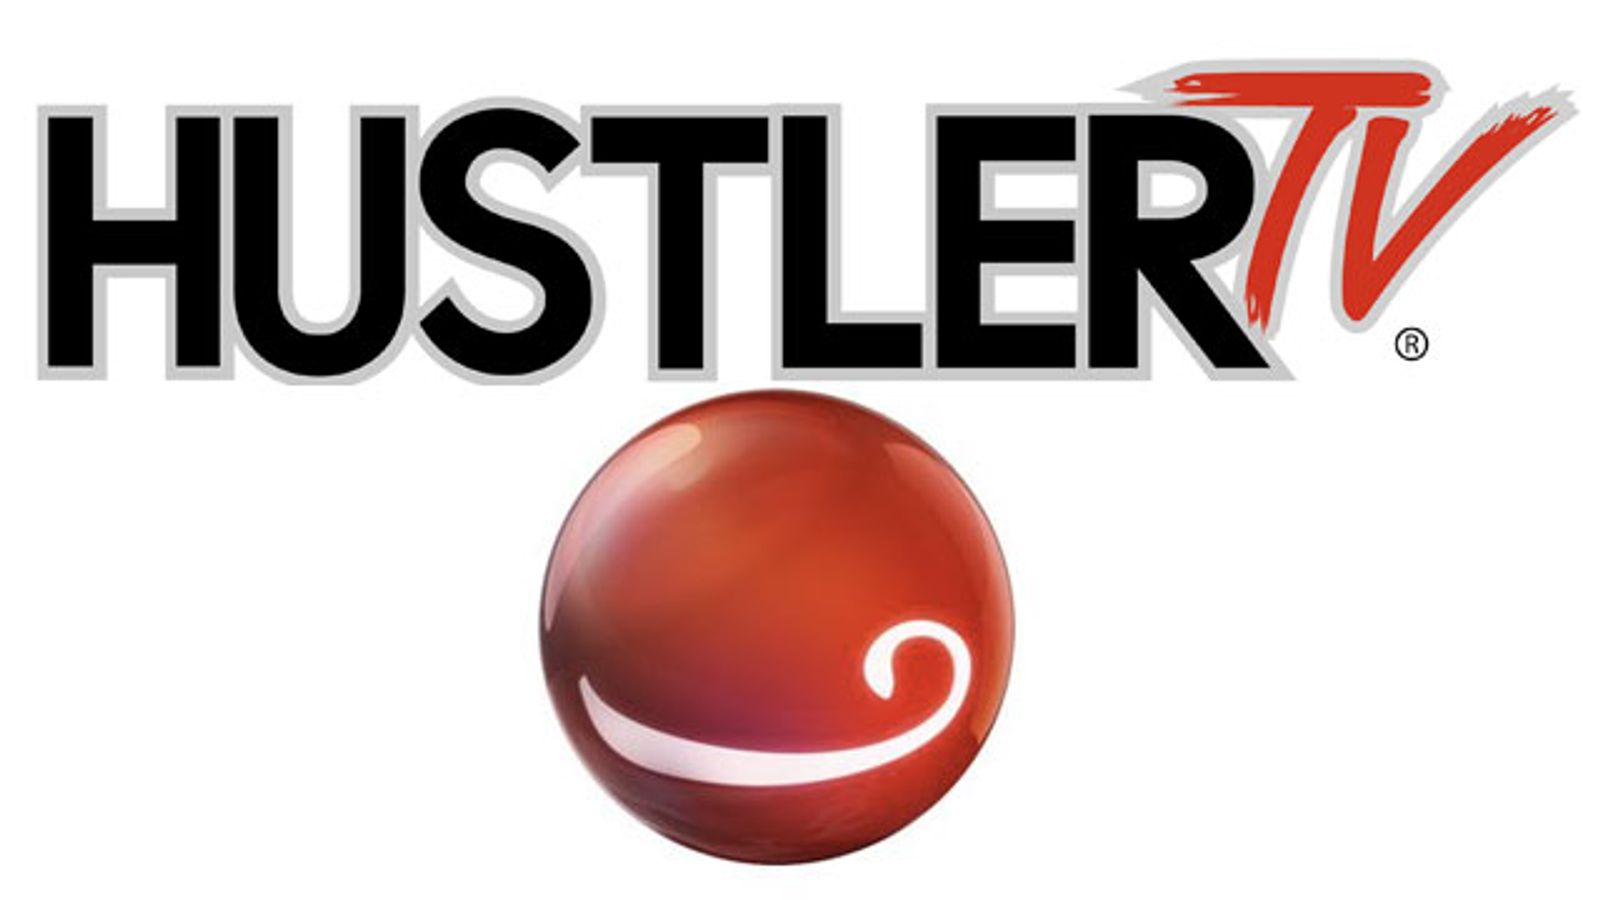 Hustler TV Partners With MiKandi for 'Barely Legal' Android Apps